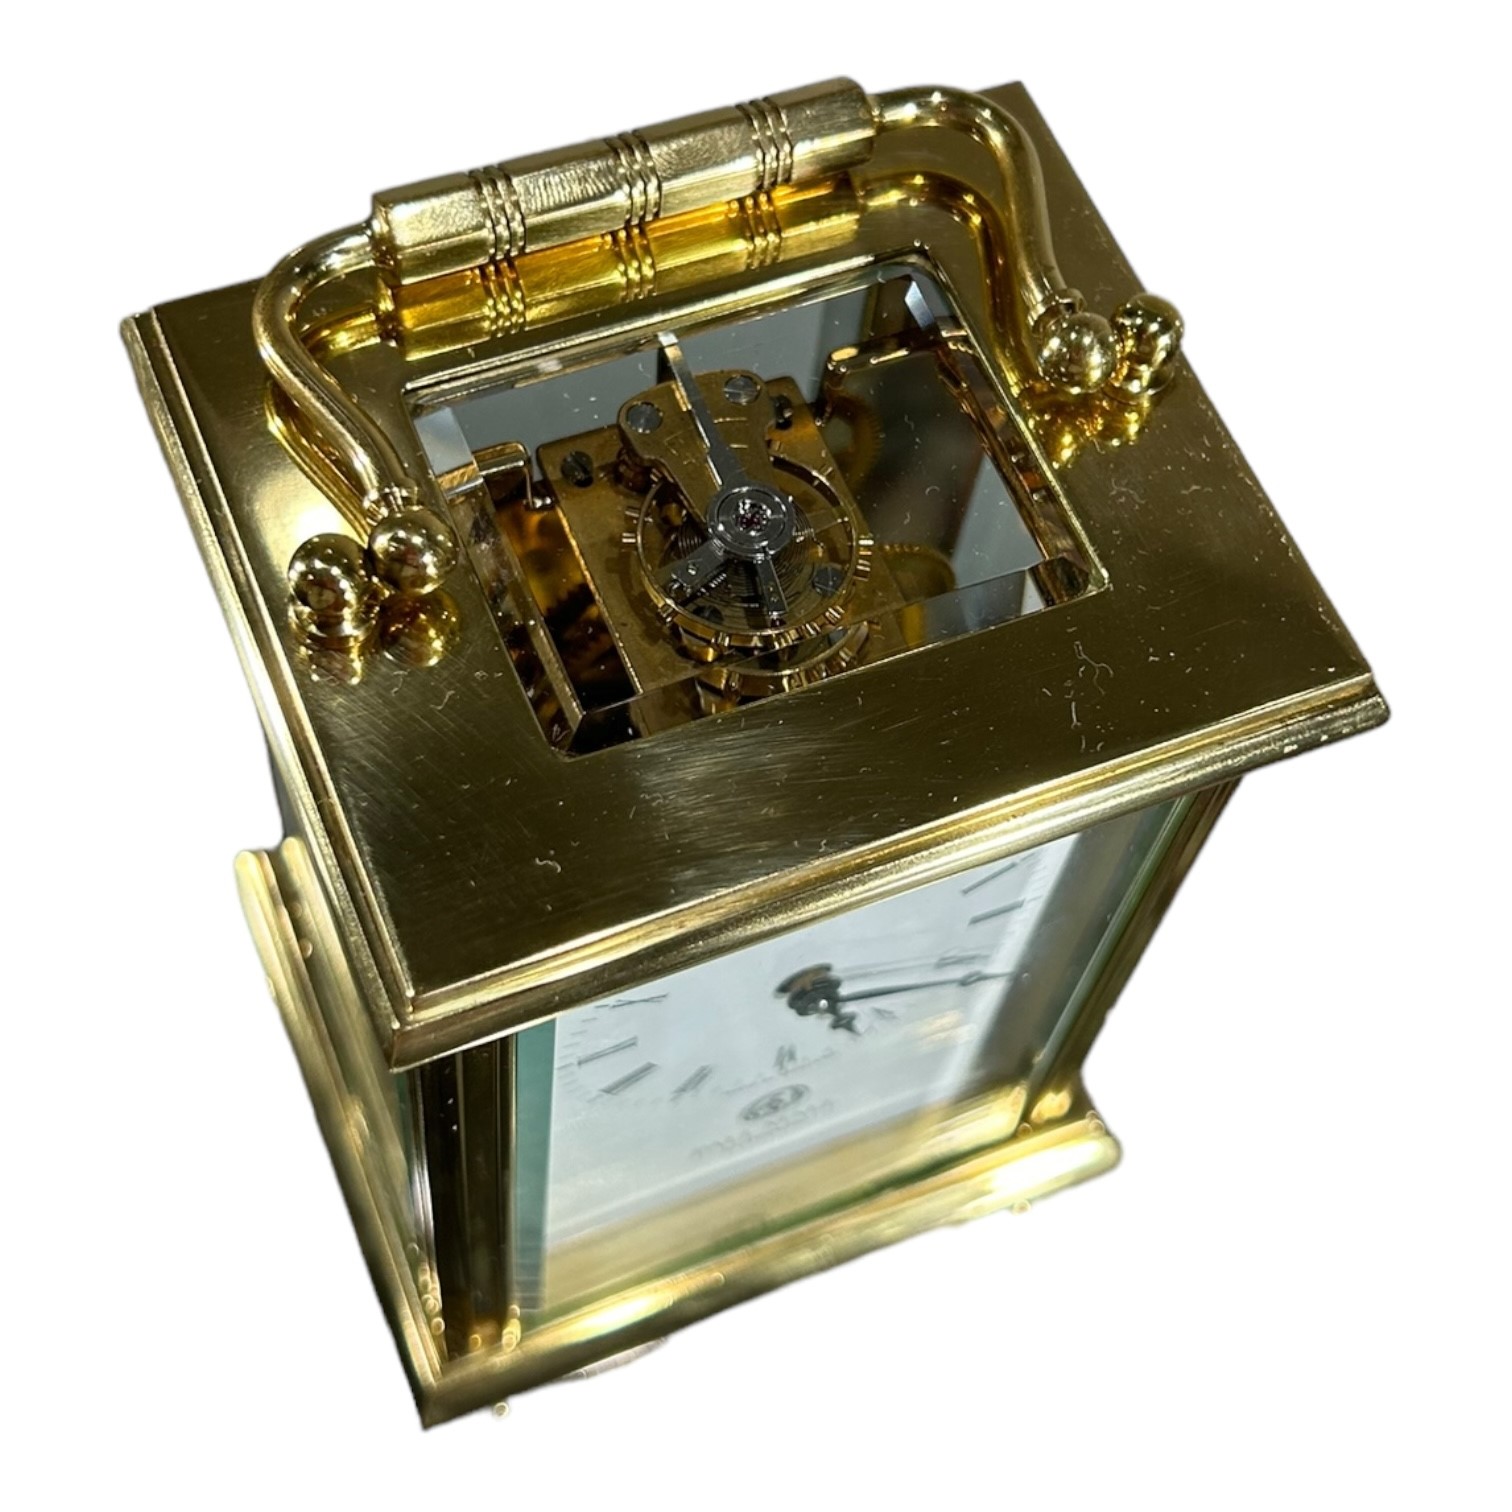 L'EPÉE FOR PALL MALL GOLDSMITHS, LONDON, AN EARLY 21ST CENTURY BRASS 8 DAY CARRIAGE CLOCK Having - Image 4 of 7